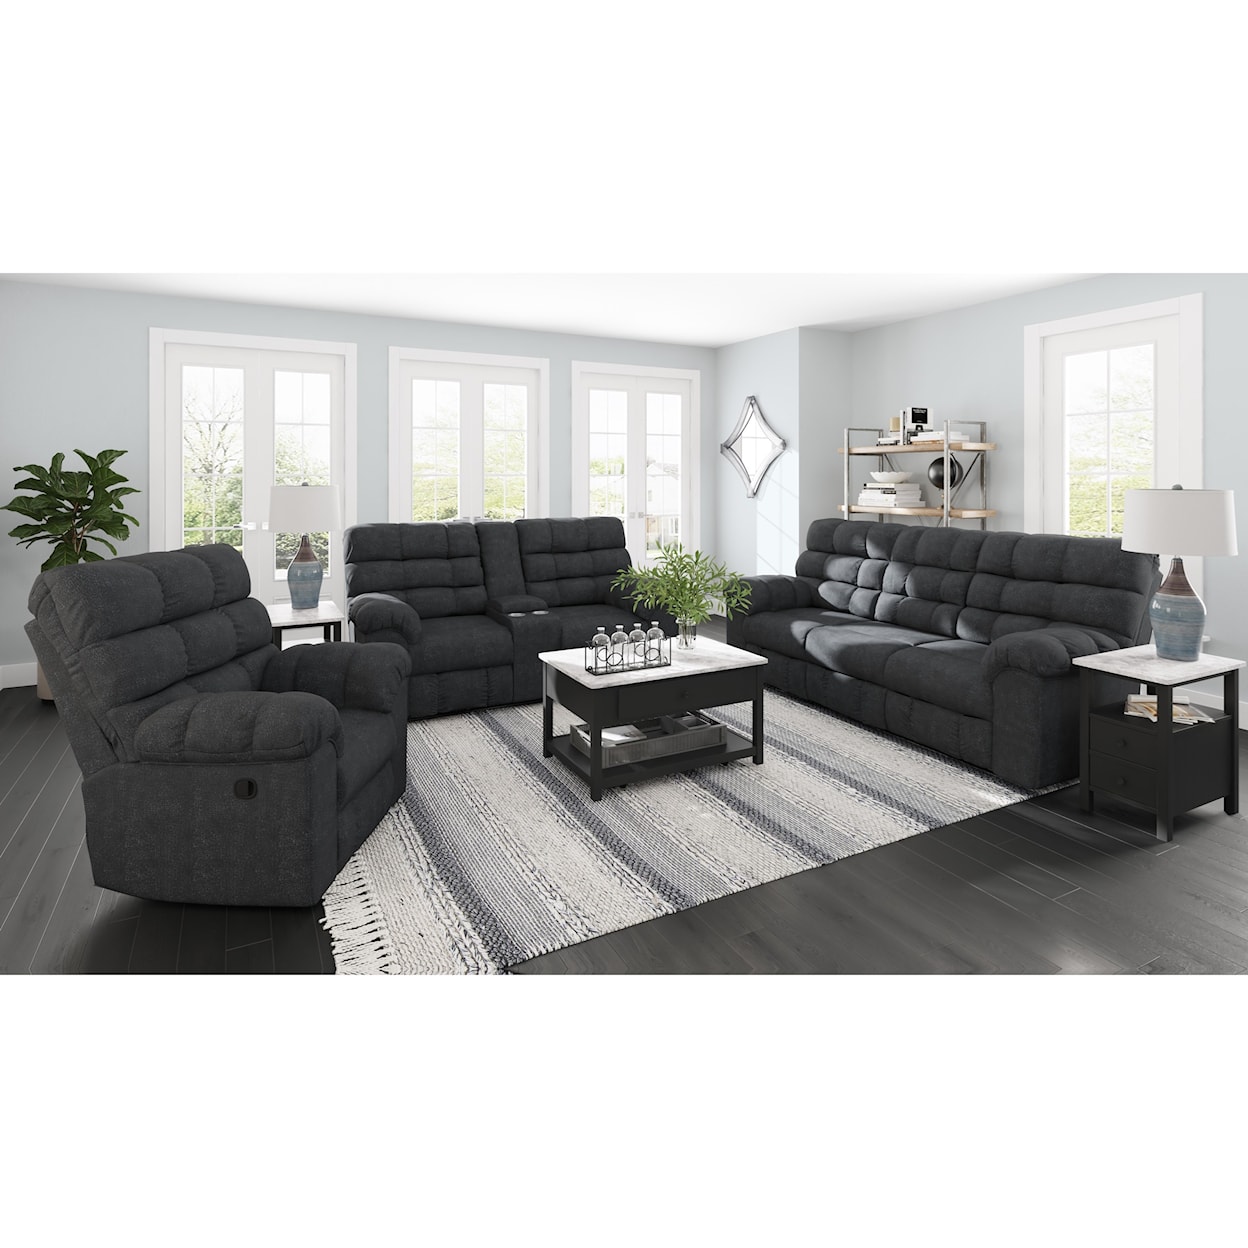 Signature Design by Ashley Furniture Wilhurst Reclining Living Room Group